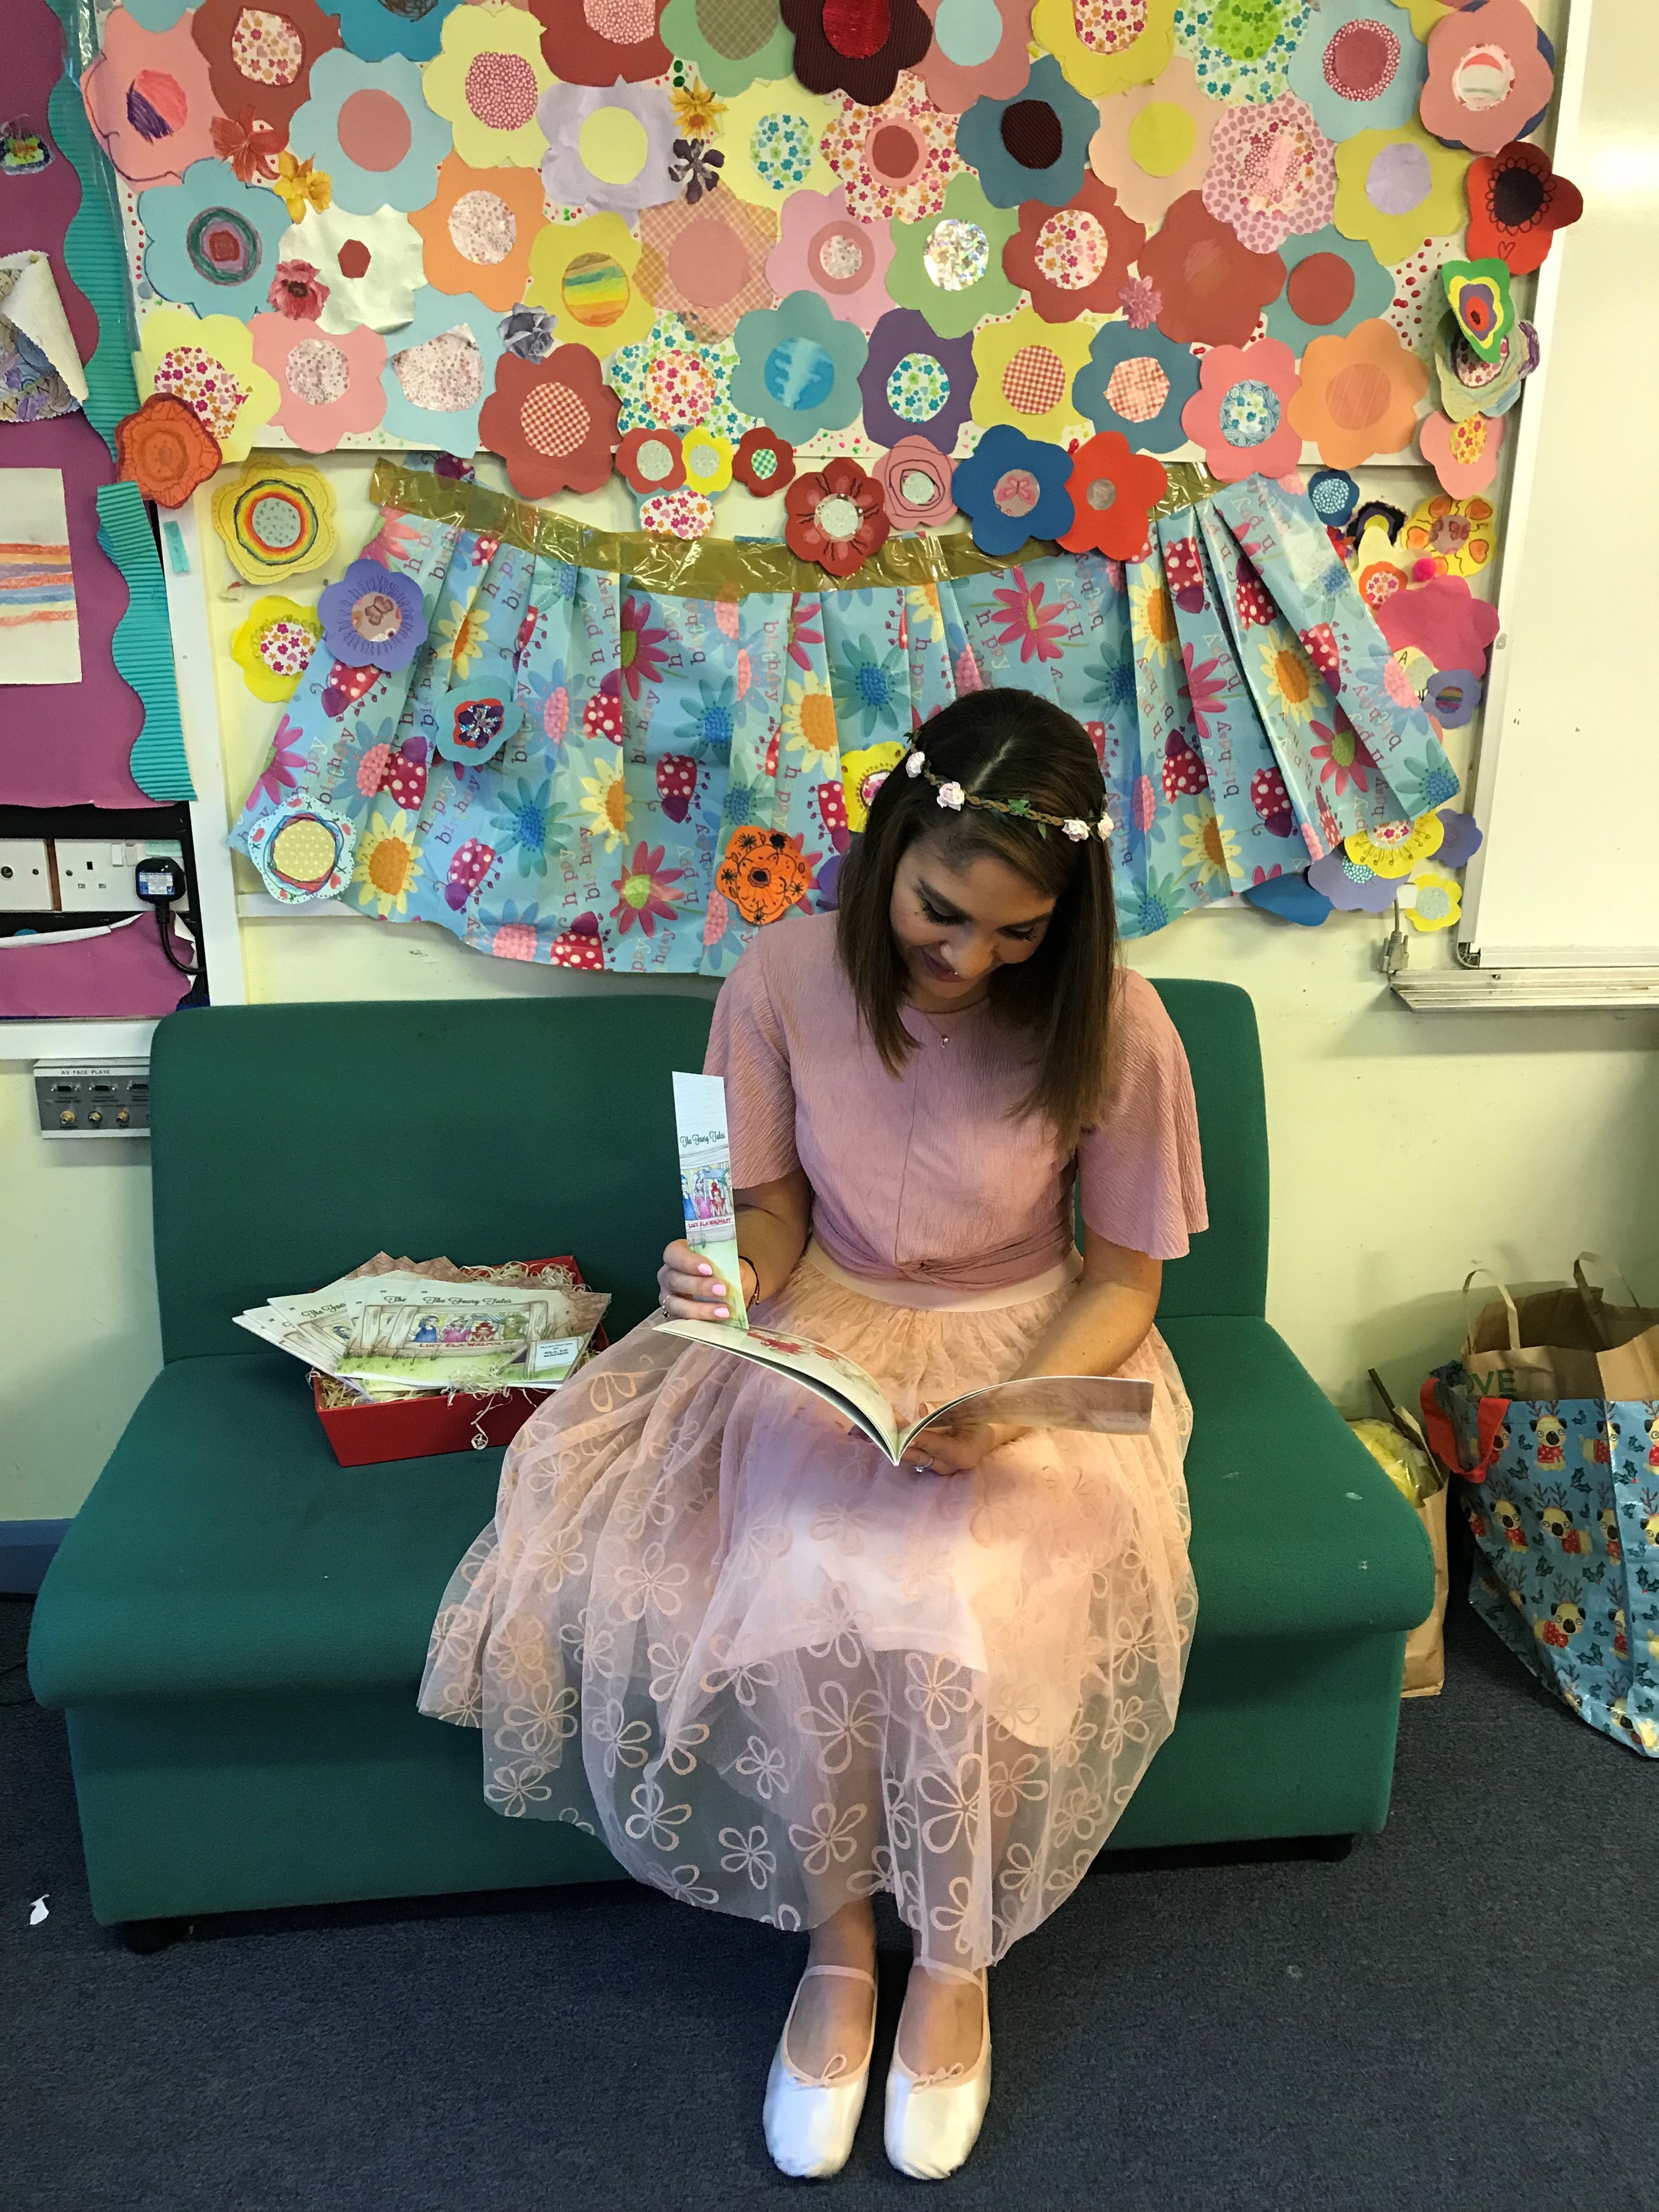 Lucy Ela Walmsley, the Author of The Faery Tales, Enjoyed a Book Reading and Signing Event at School